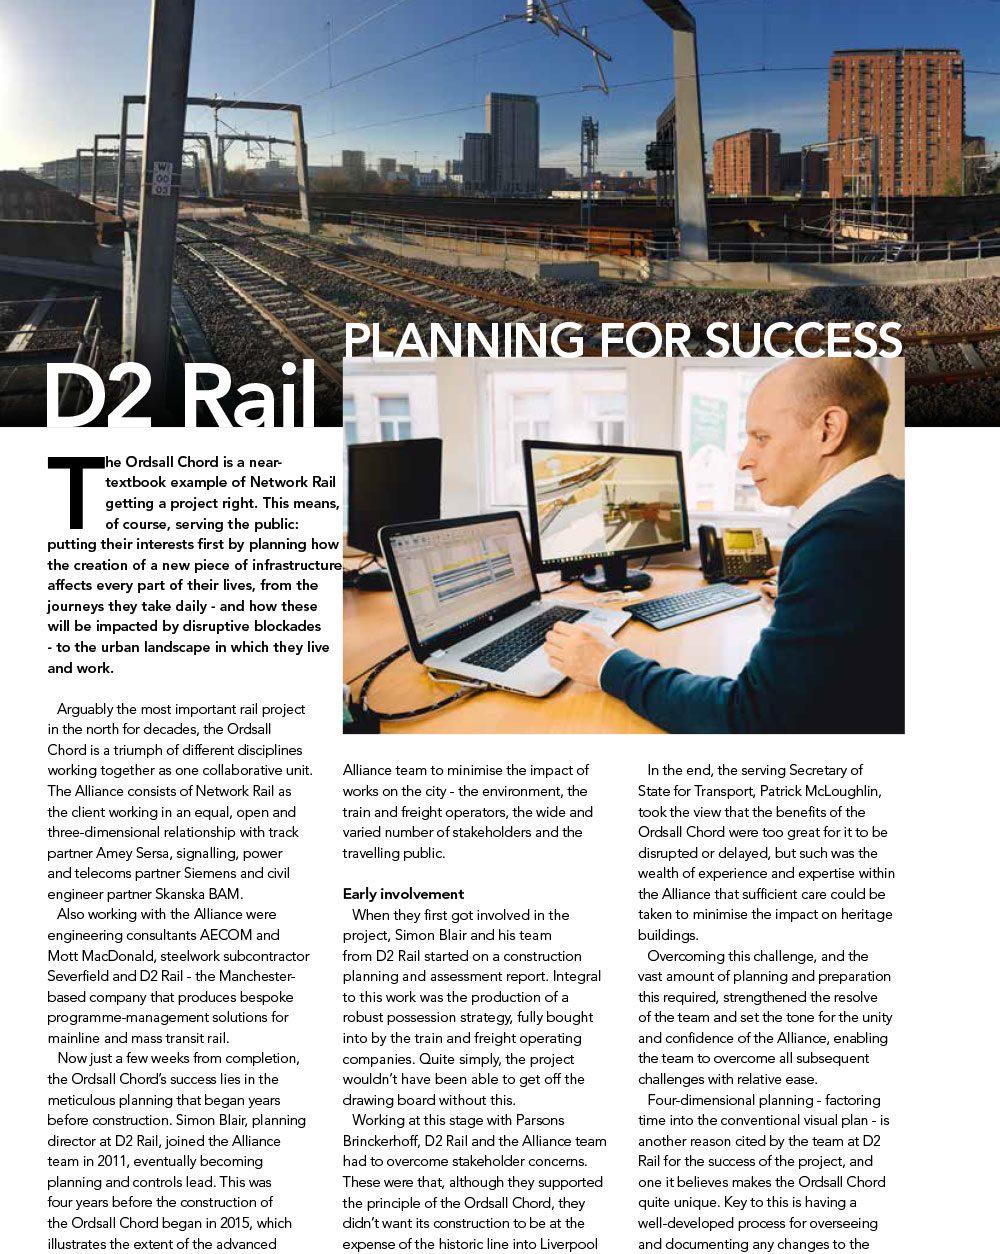 Rail Engineer feature for D2 Rail - Planning for Success